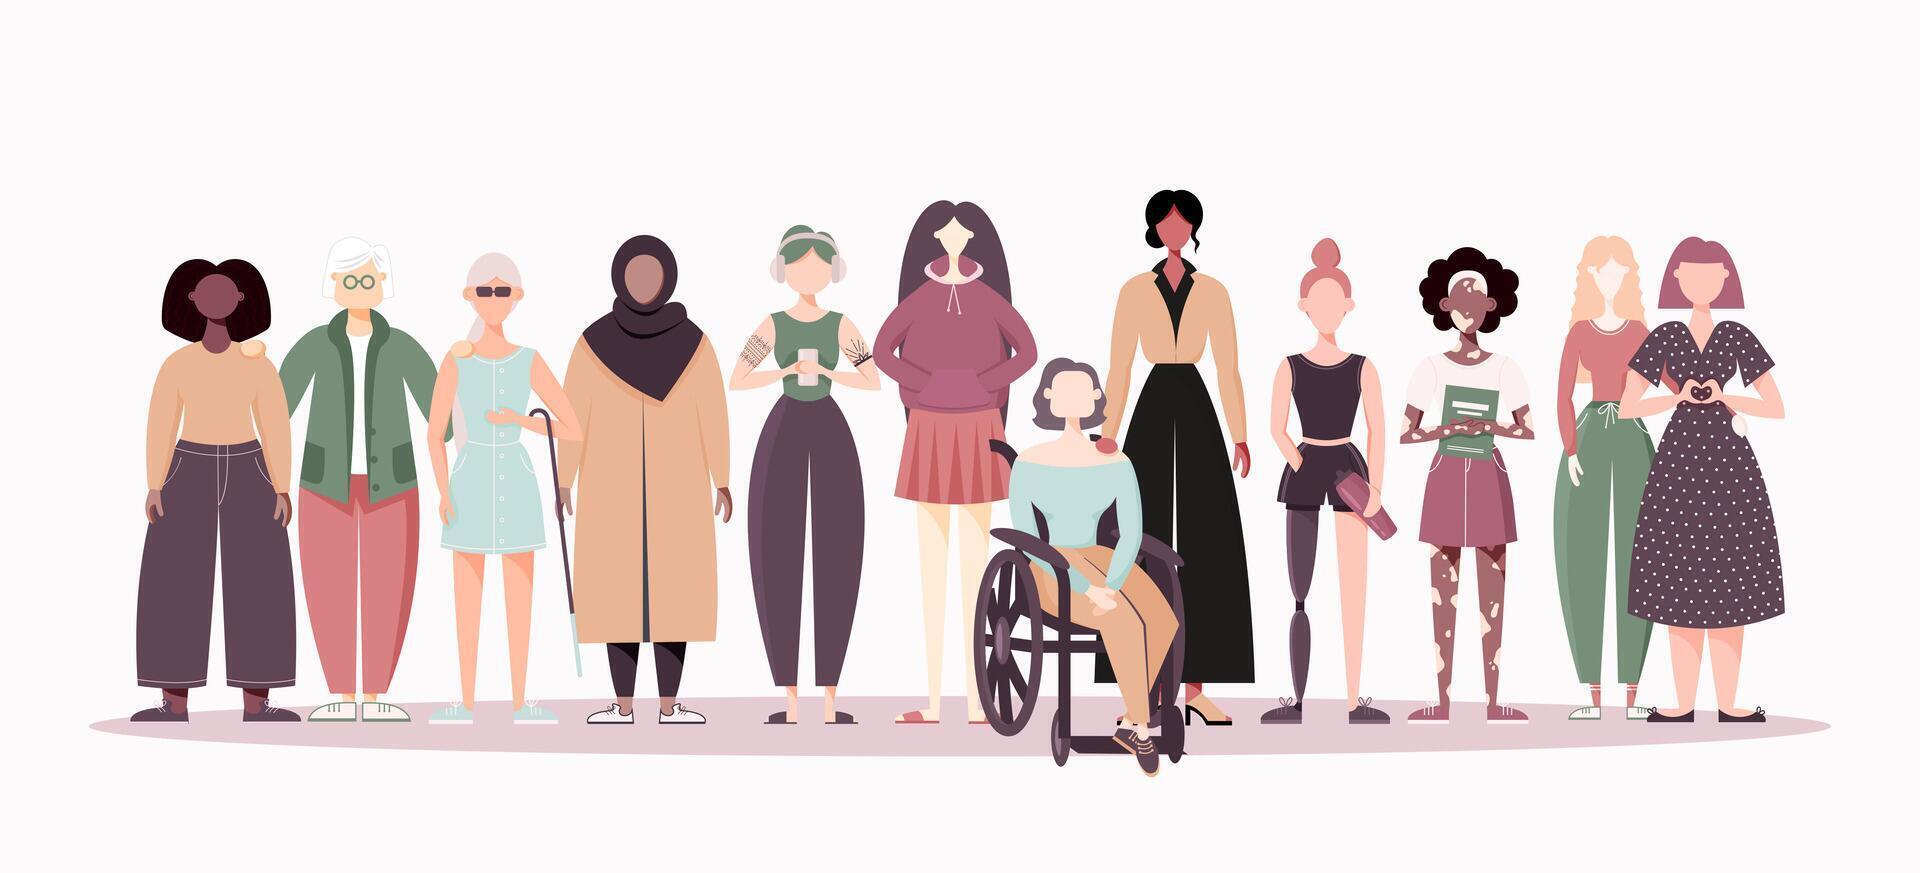 Group of women in different ethnicity, orientation, abilities, age, body type, hair color. Vector illustration of diverse women in casual pastel color clothing. Hand drawn characters in flat style.